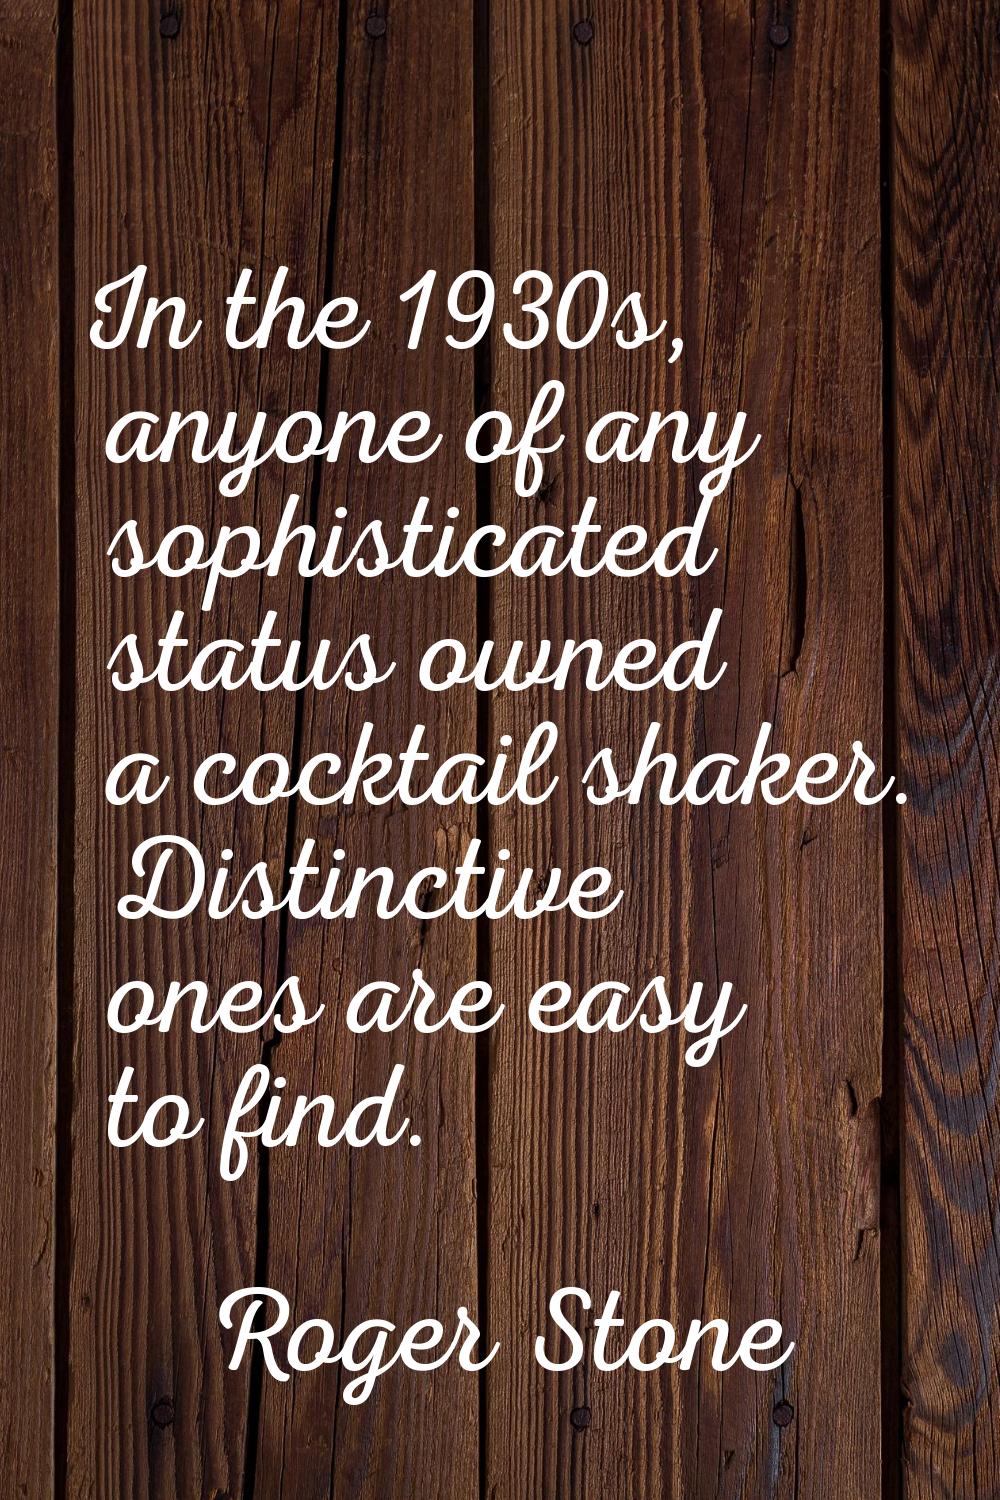 In the 1930s, anyone of any sophisticated status owned a cocktail shaker. Distinctive ones are easy